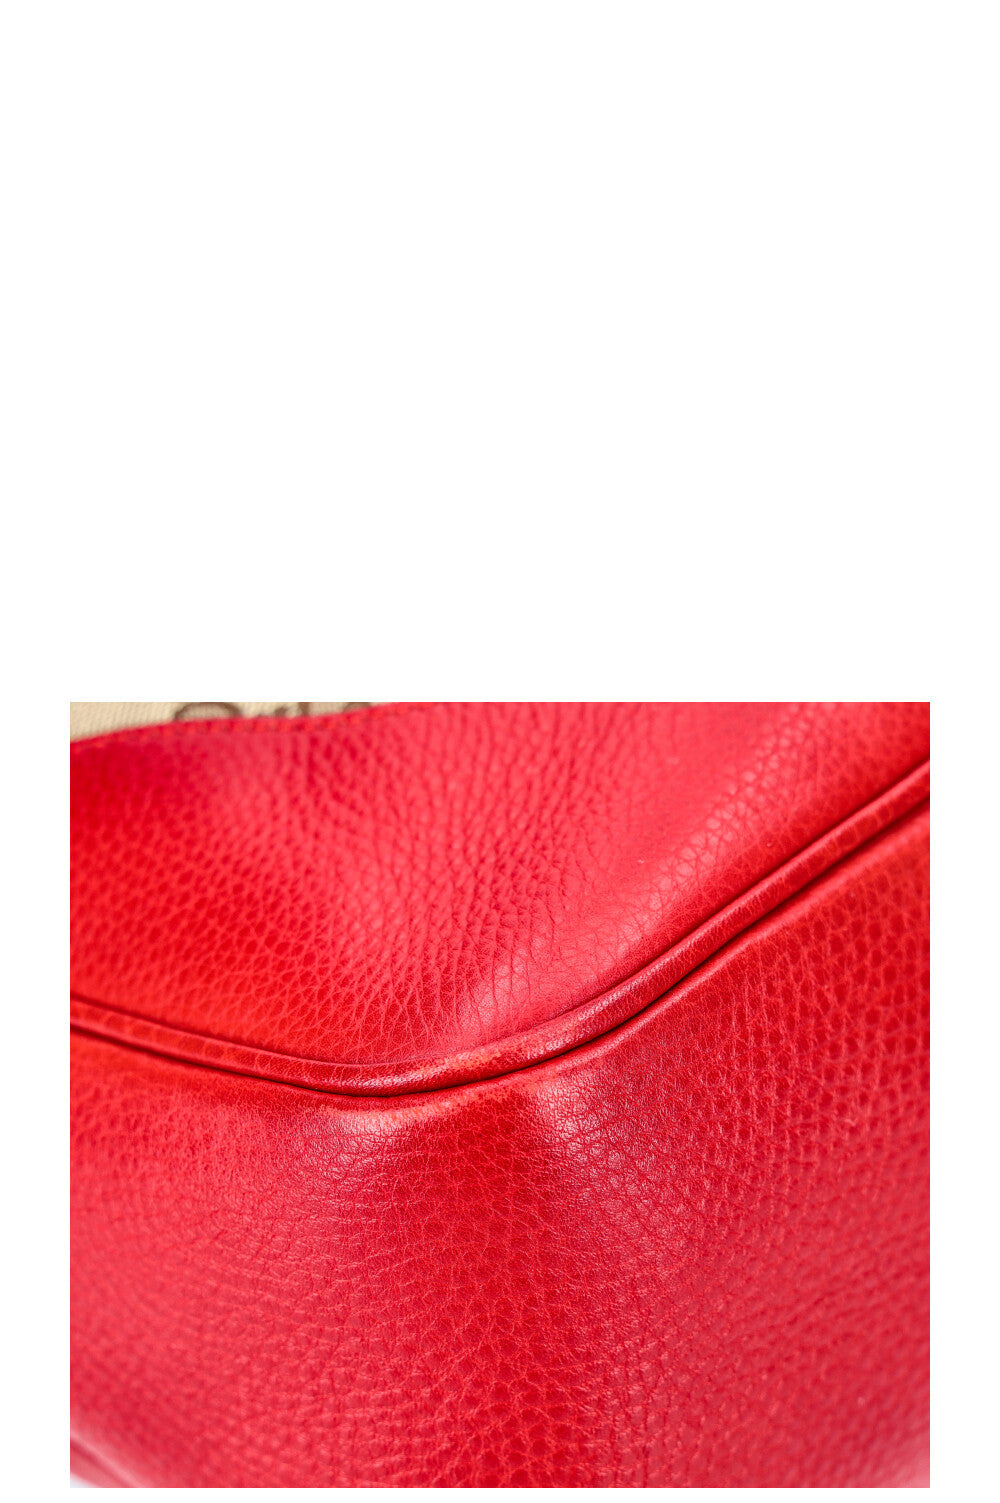 GUCCI Diana Bamboo Bag GG Canvas Red